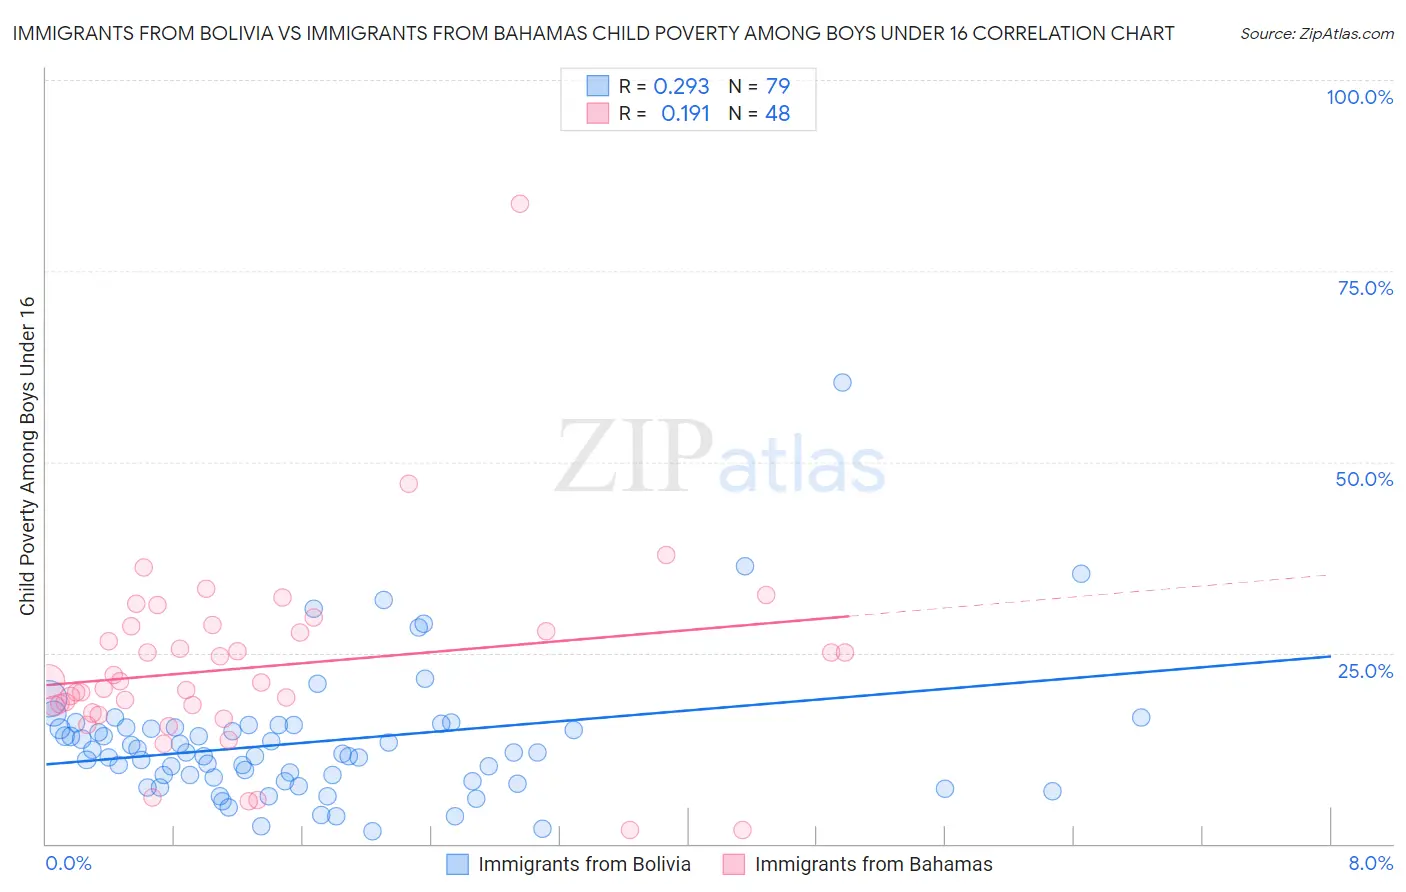 Immigrants from Bolivia vs Immigrants from Bahamas Child Poverty Among Boys Under 16